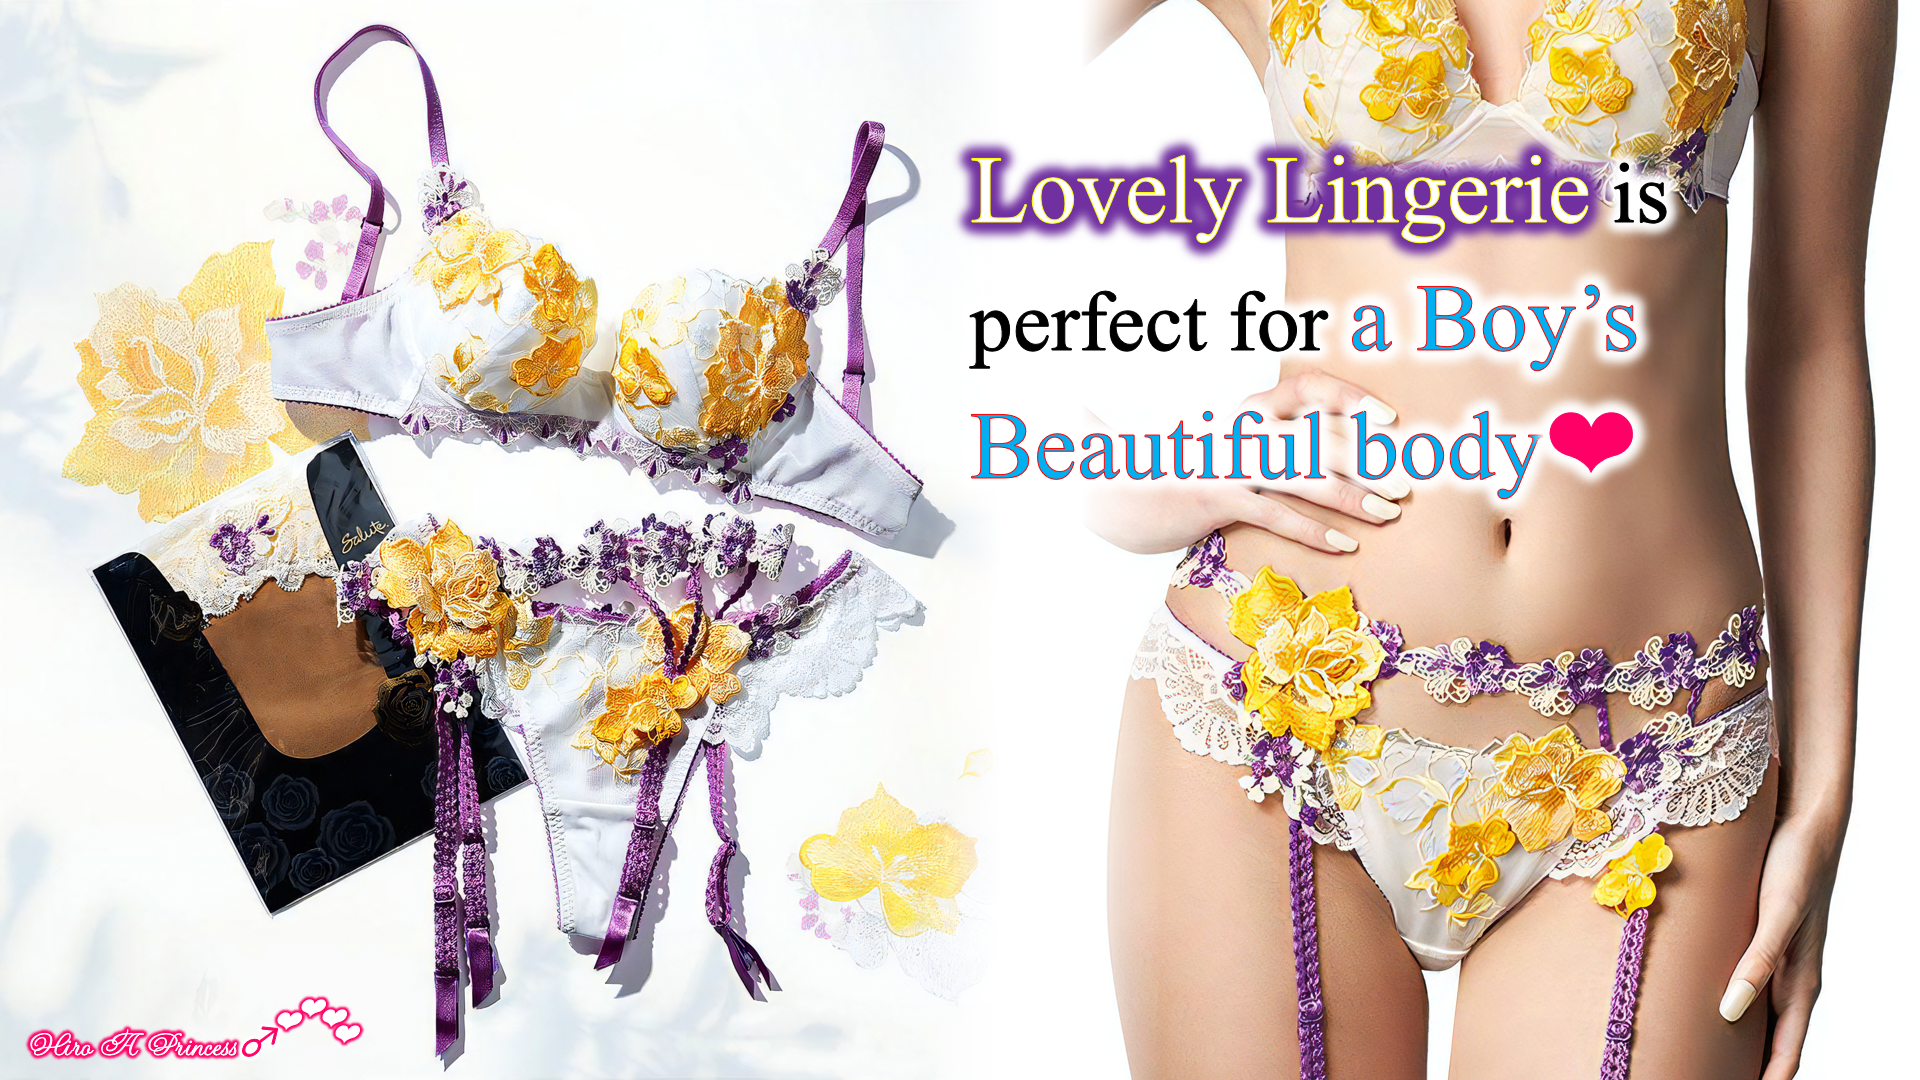 Lovely Lingerie is perfect for Boys’ Beautiful bodies E